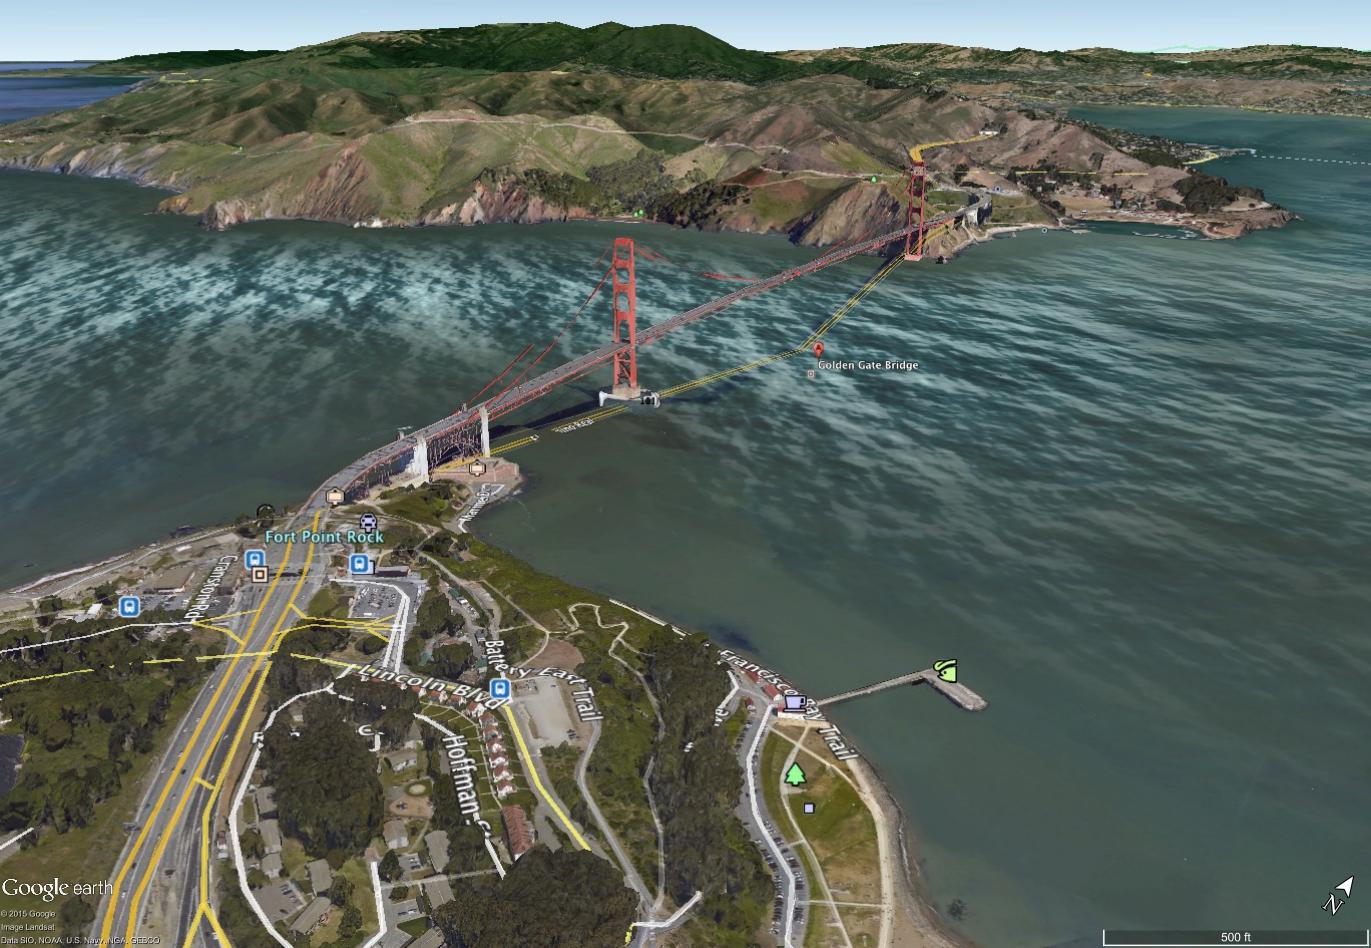 A Google Maps image of the Golden Gate Bridge in San Franciso.